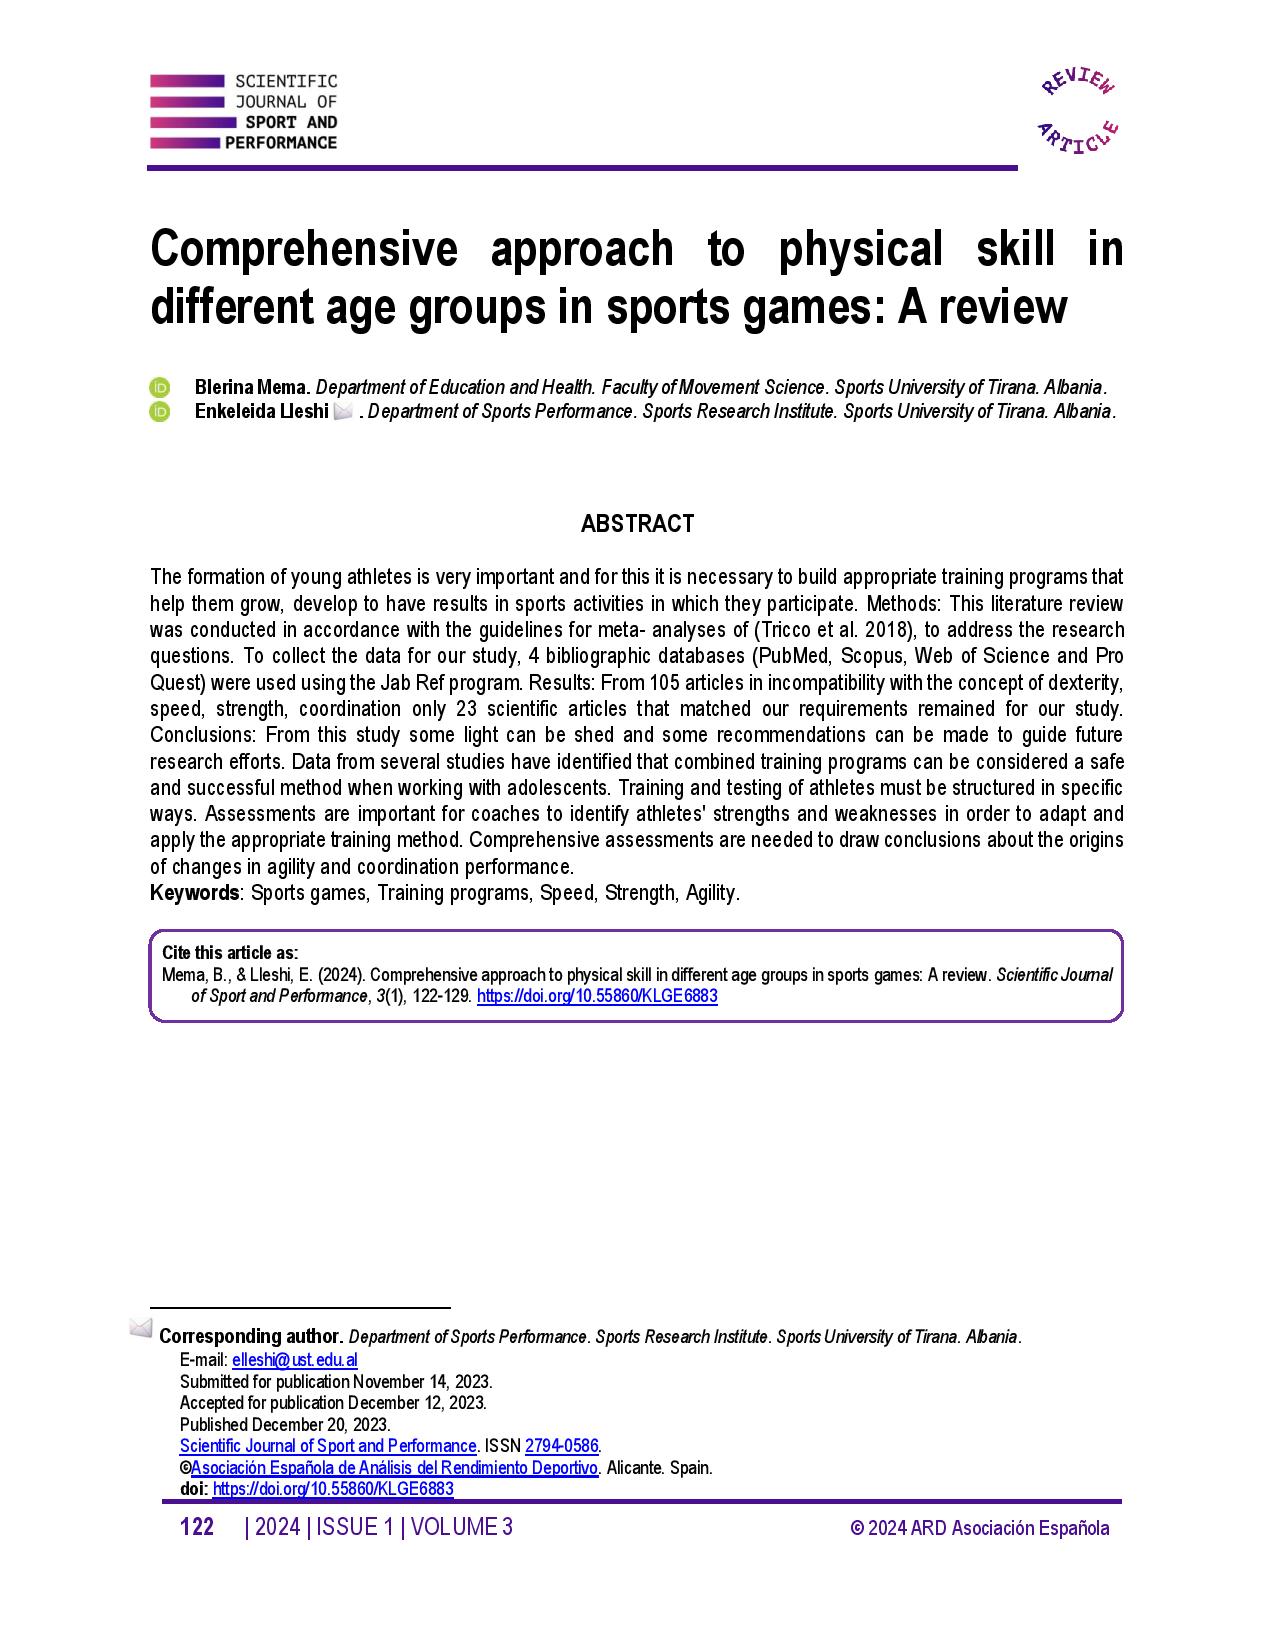 Comprehensive approach to physical skill in different age groups in sports games: A review